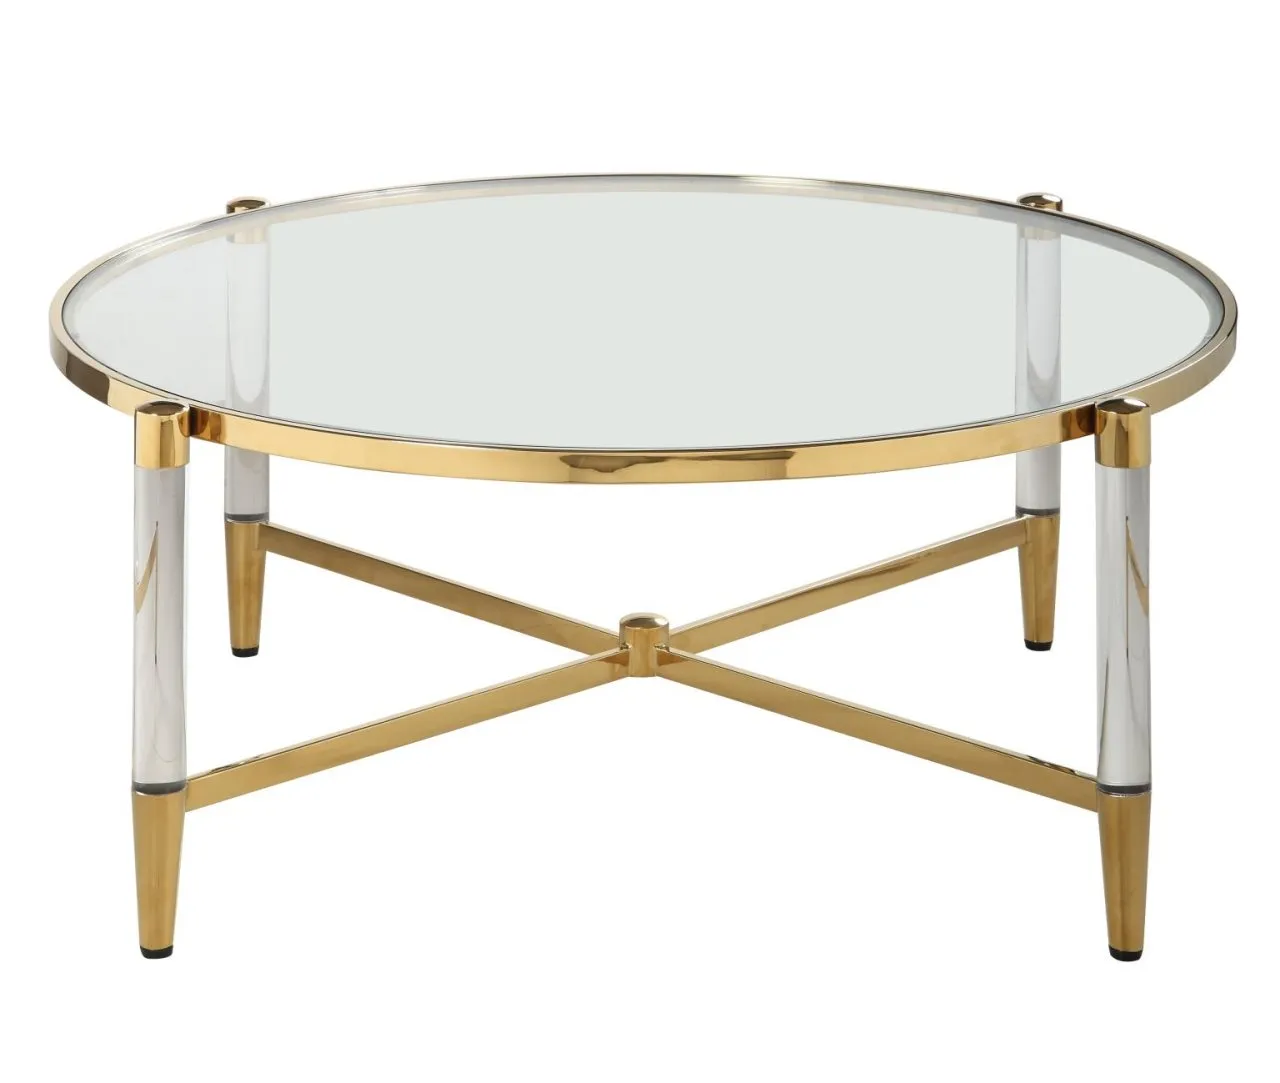 DENALI ROUND TEMPERED GLASS COCKTAIL TABLE